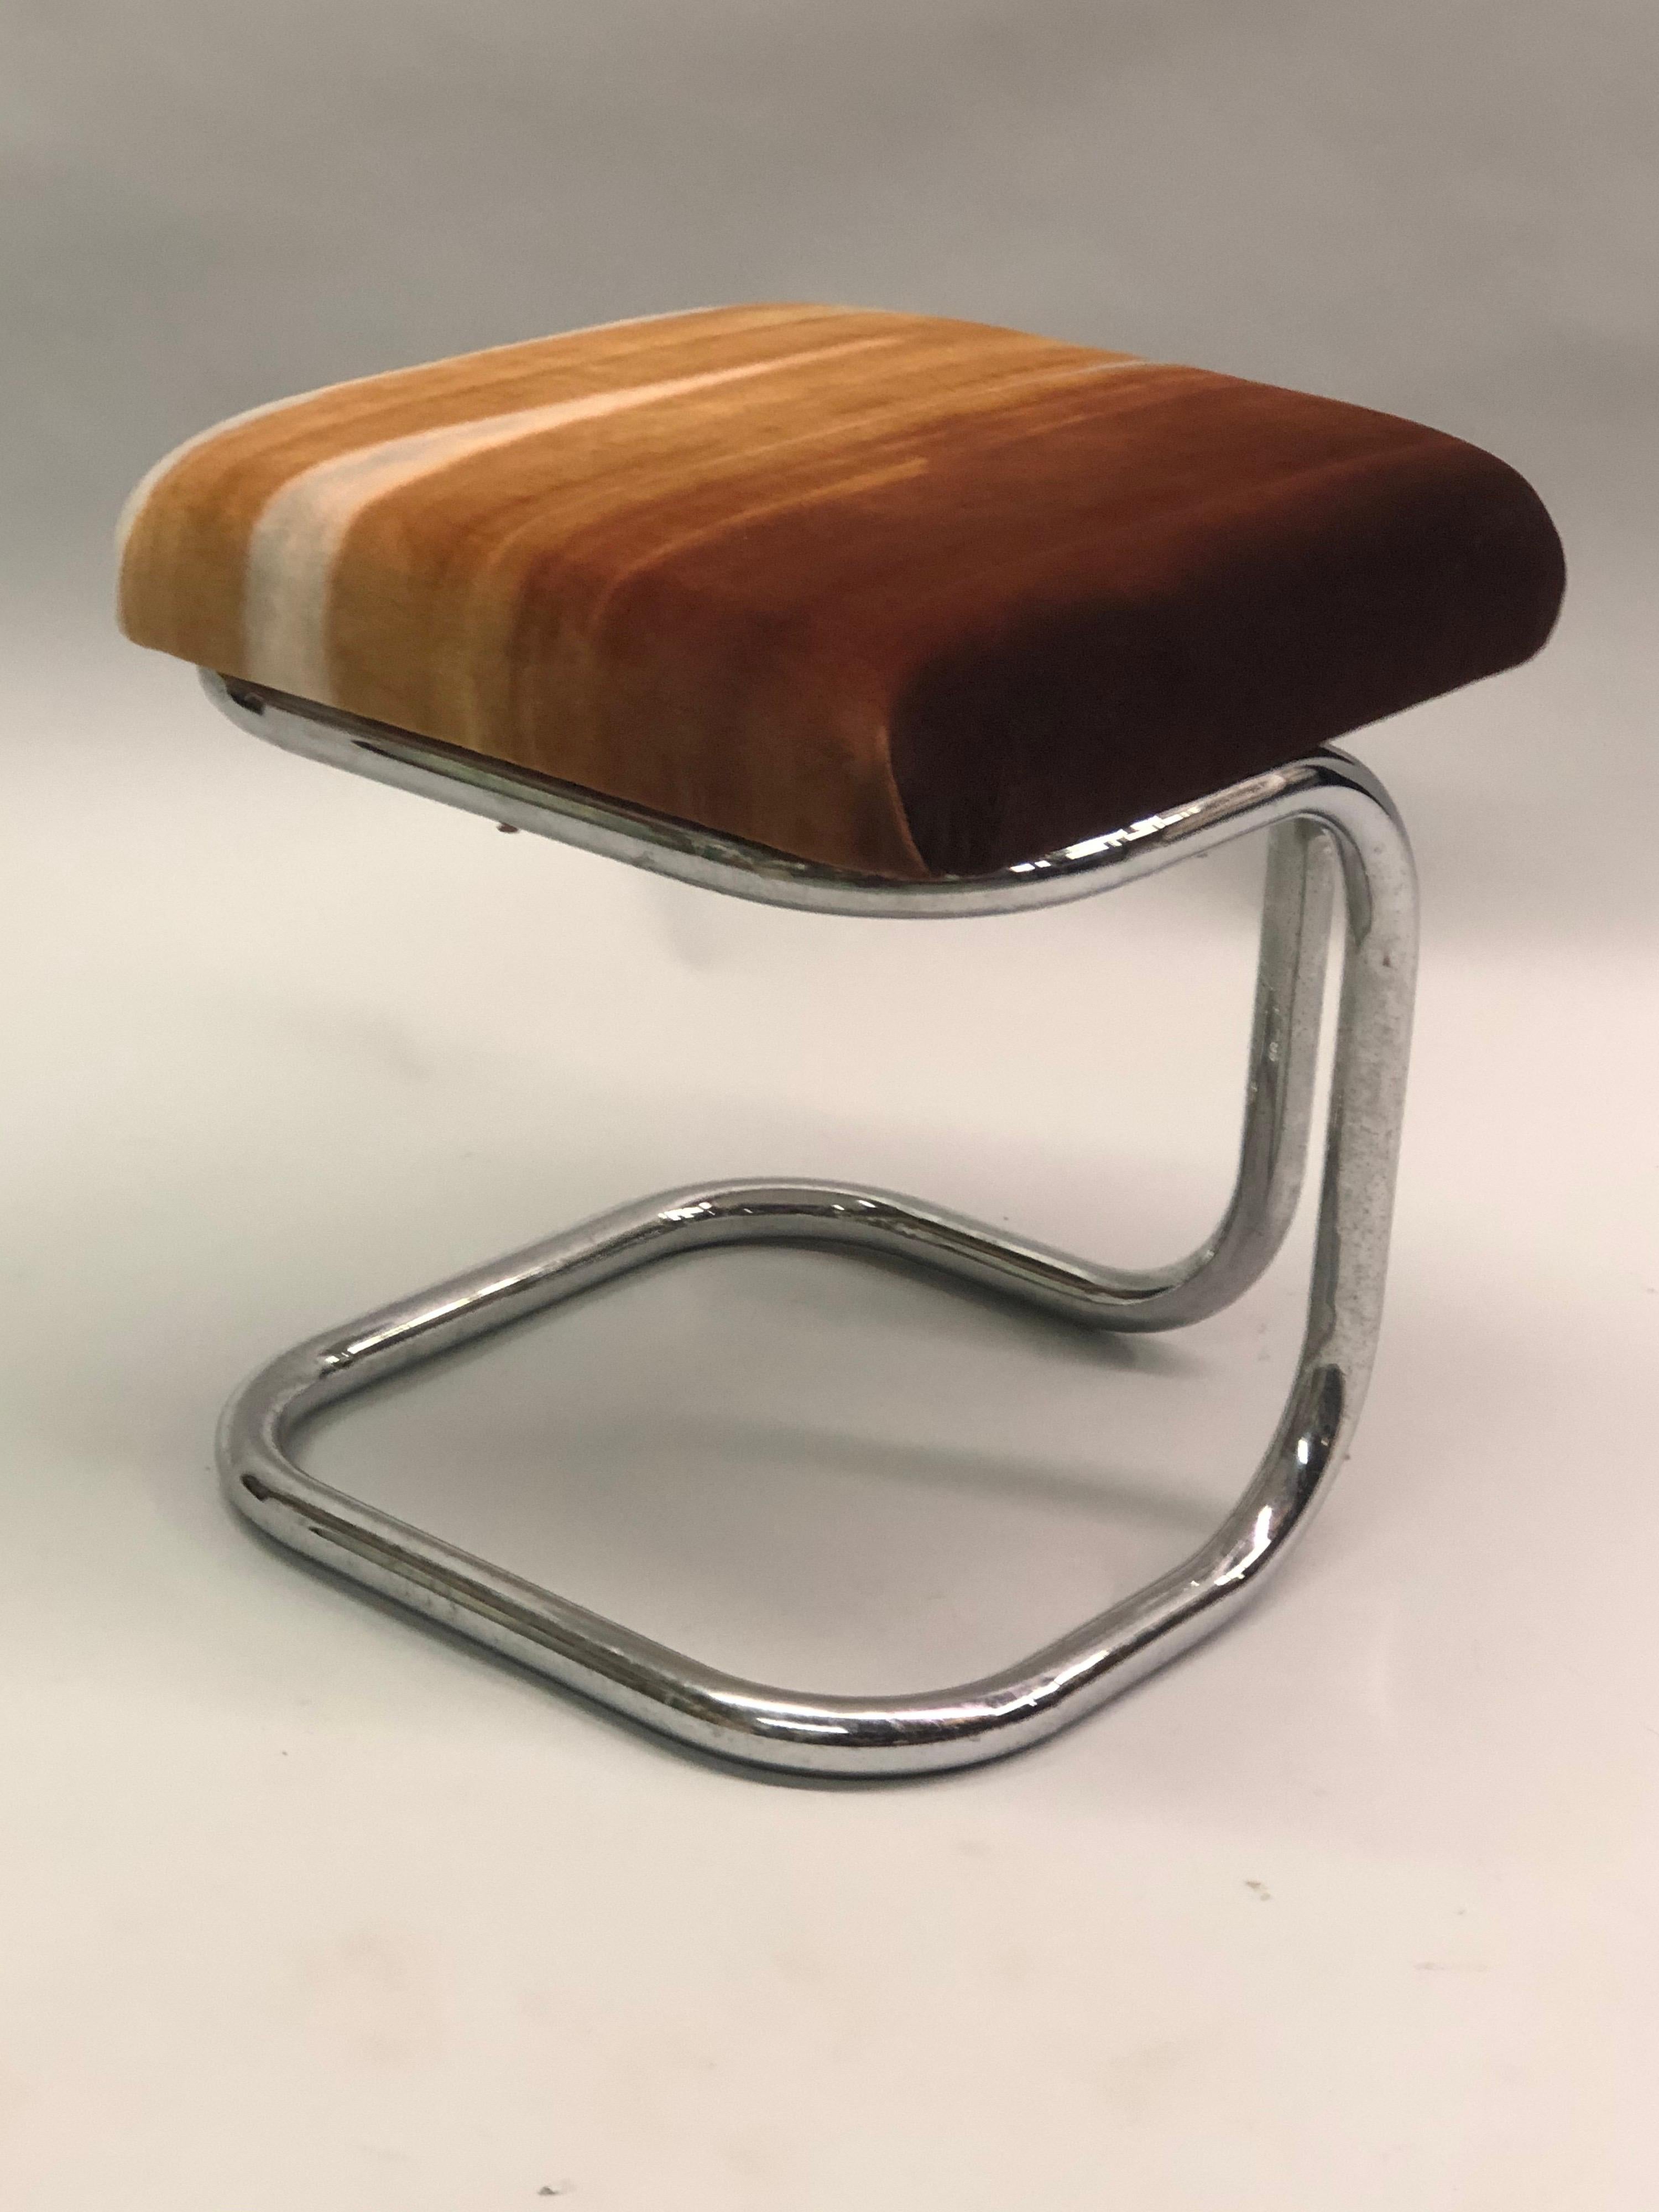 Pair of French Modernist ‘Bauhaus’ Stools with Upholstered Seats by Hermès For Sale 5